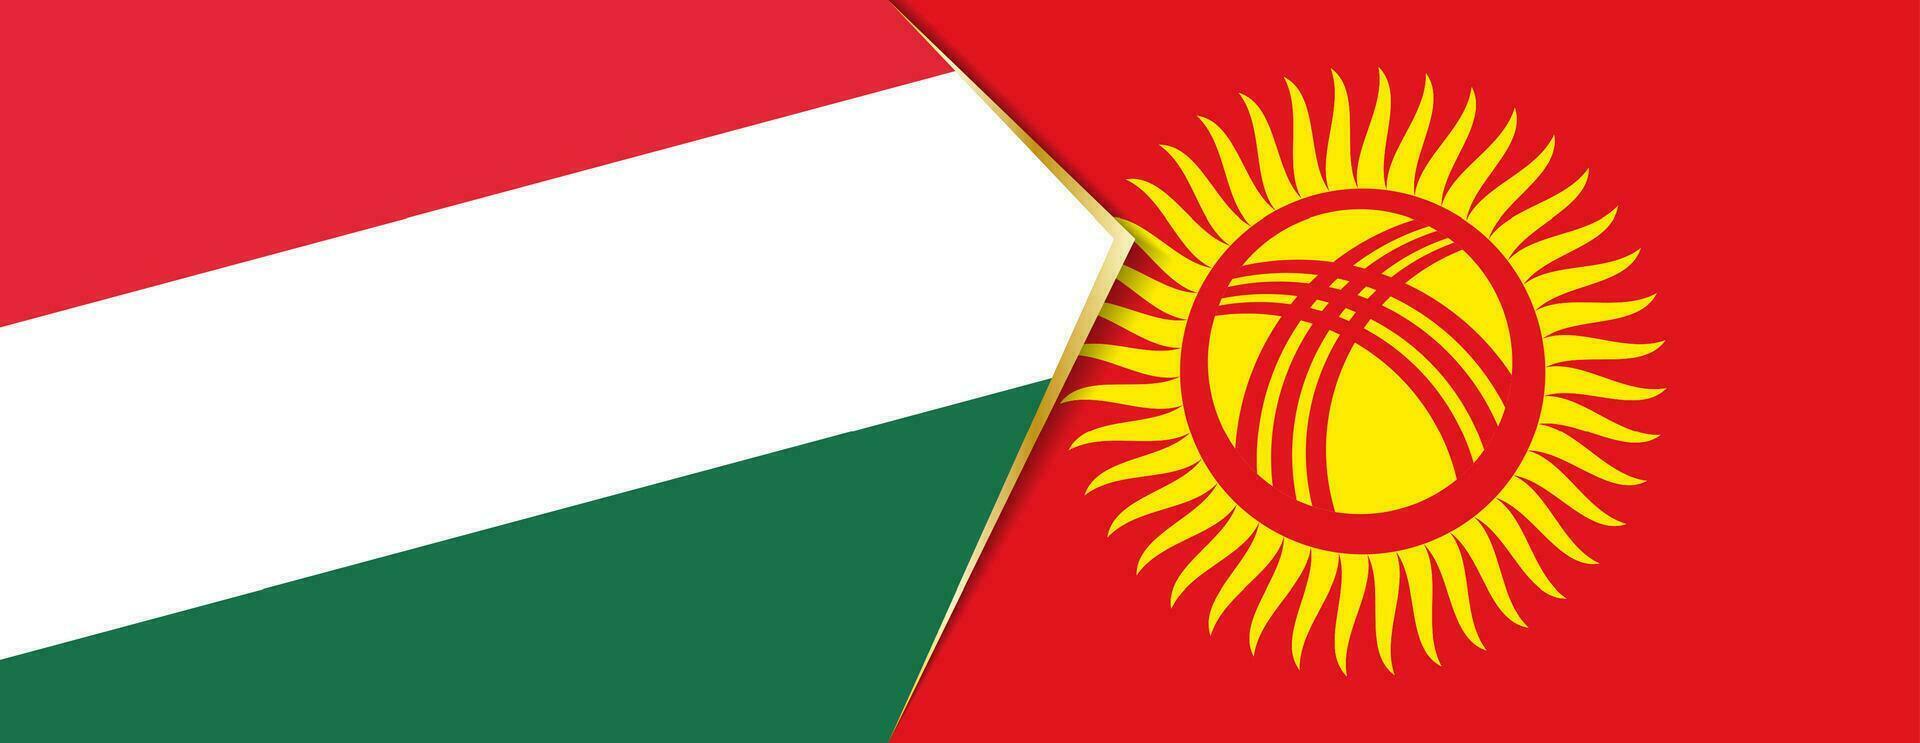 Hungary and Kyrgyzstan flags, two vector flags.